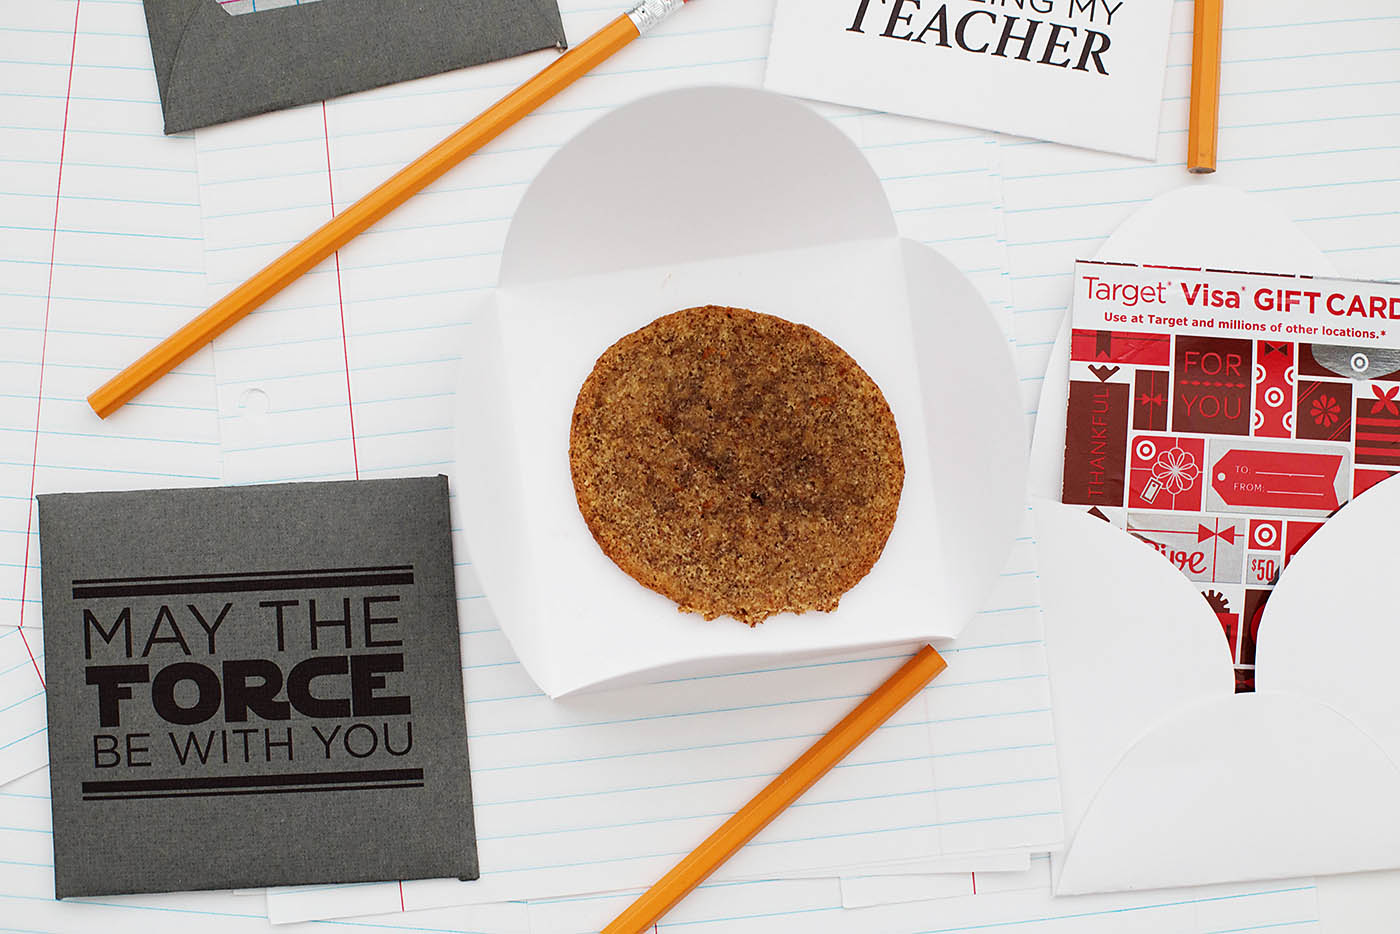 Printable gift card envelopes for teachers. Great for back to school or teacher appreciation.